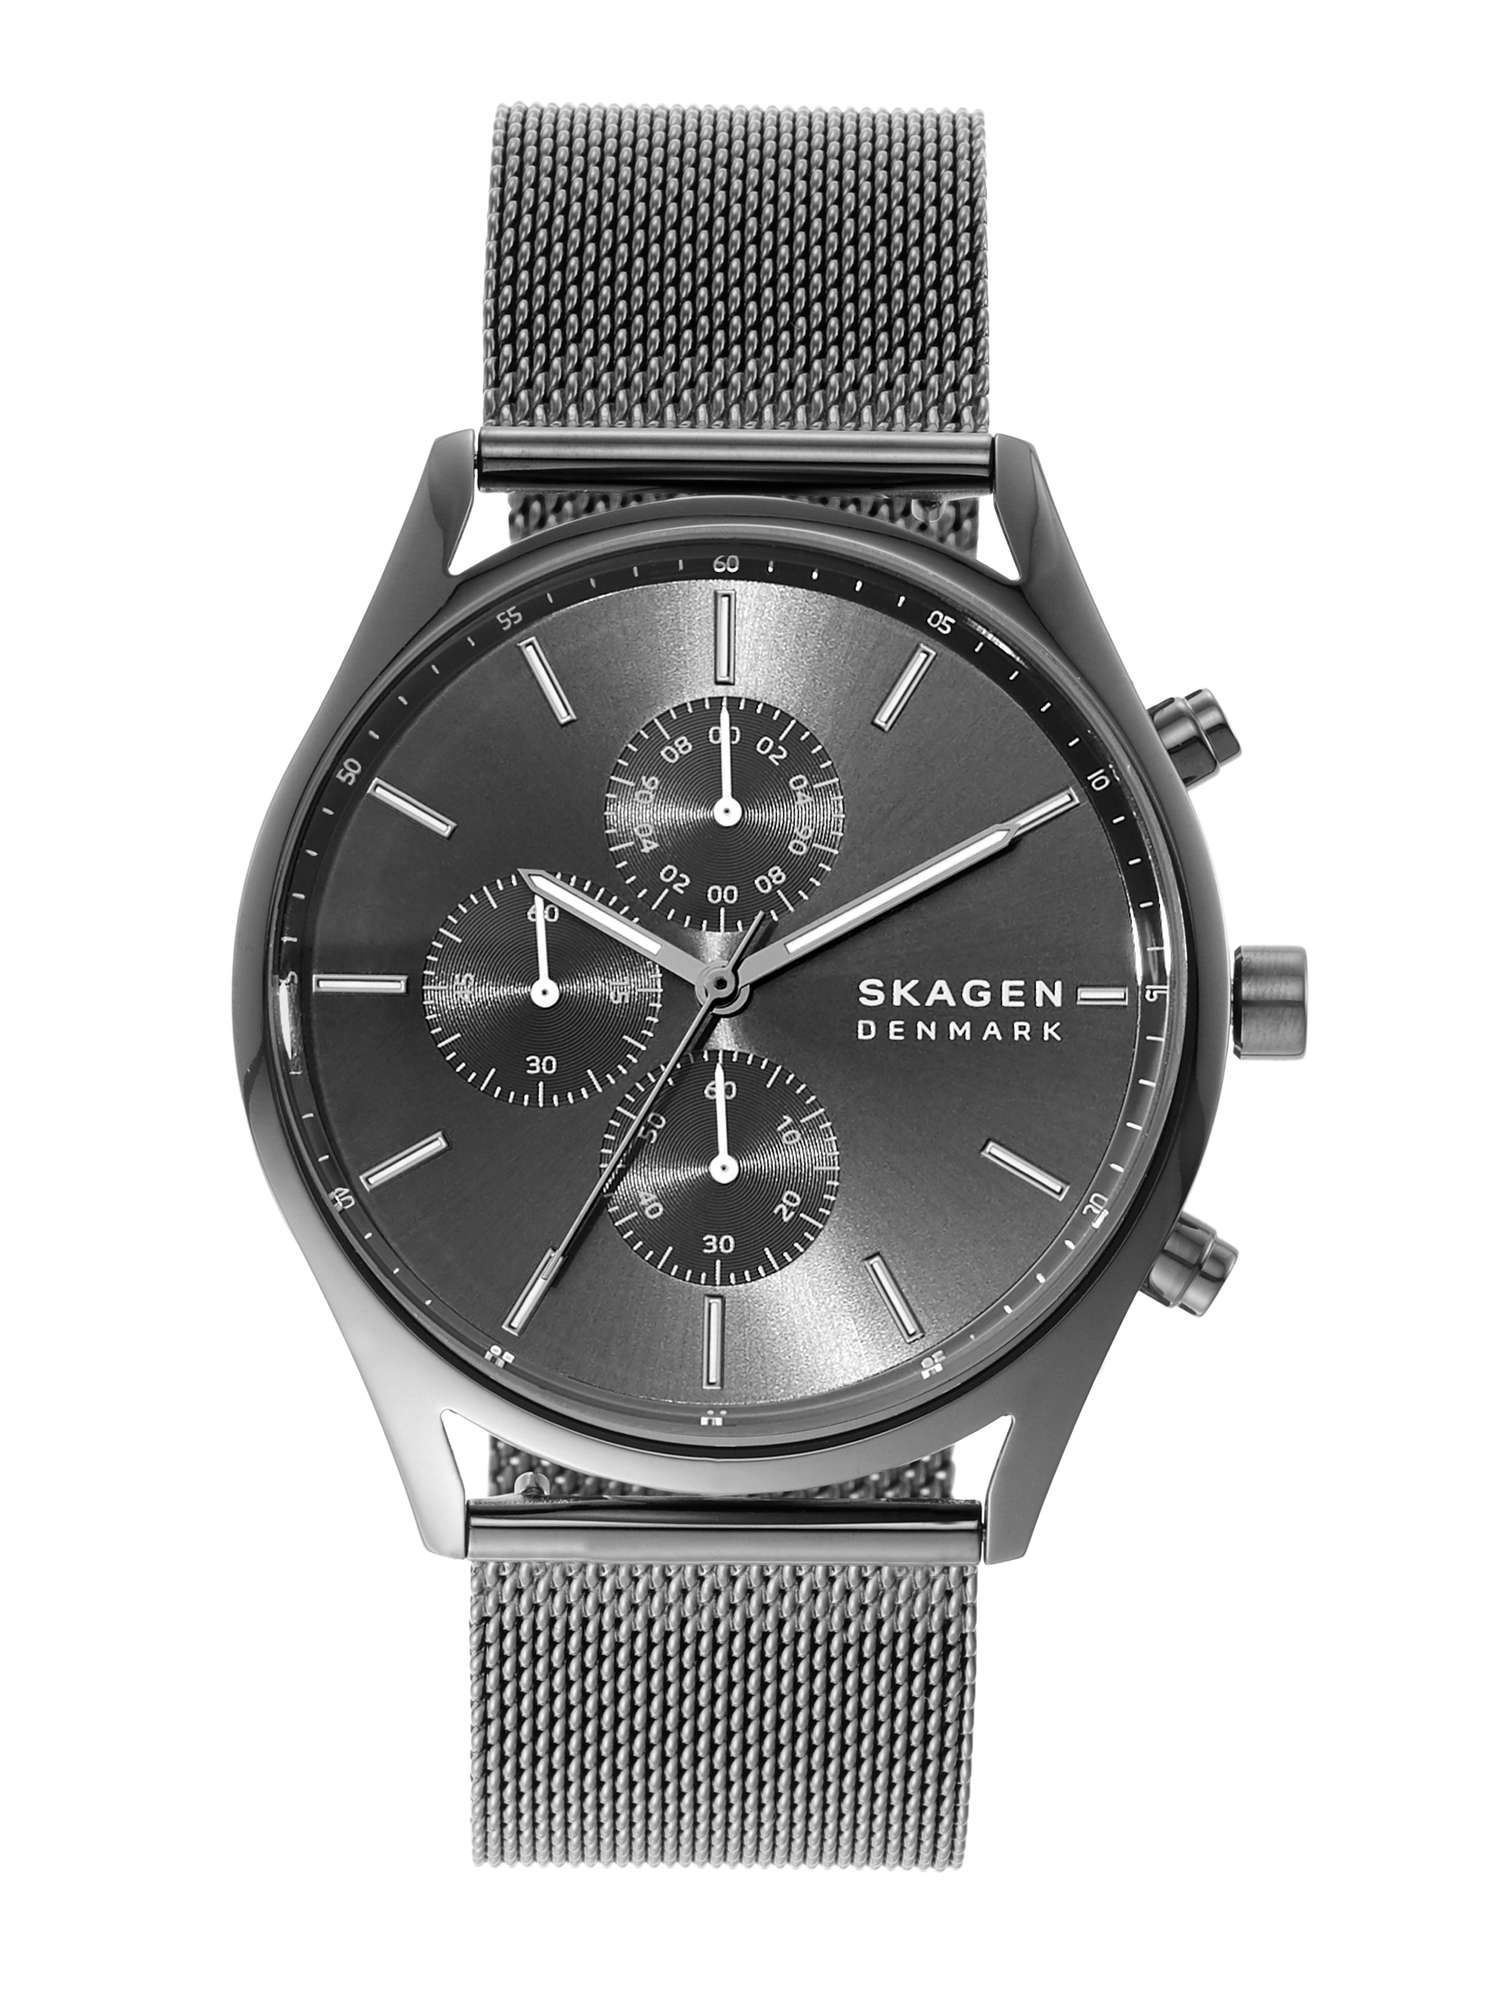 Buy Michael Kors Men's Paxton Gunmetal Watch MK8499 Online at Lowest Price  Ever in India | Check Reviews & Ratings - Shop The World